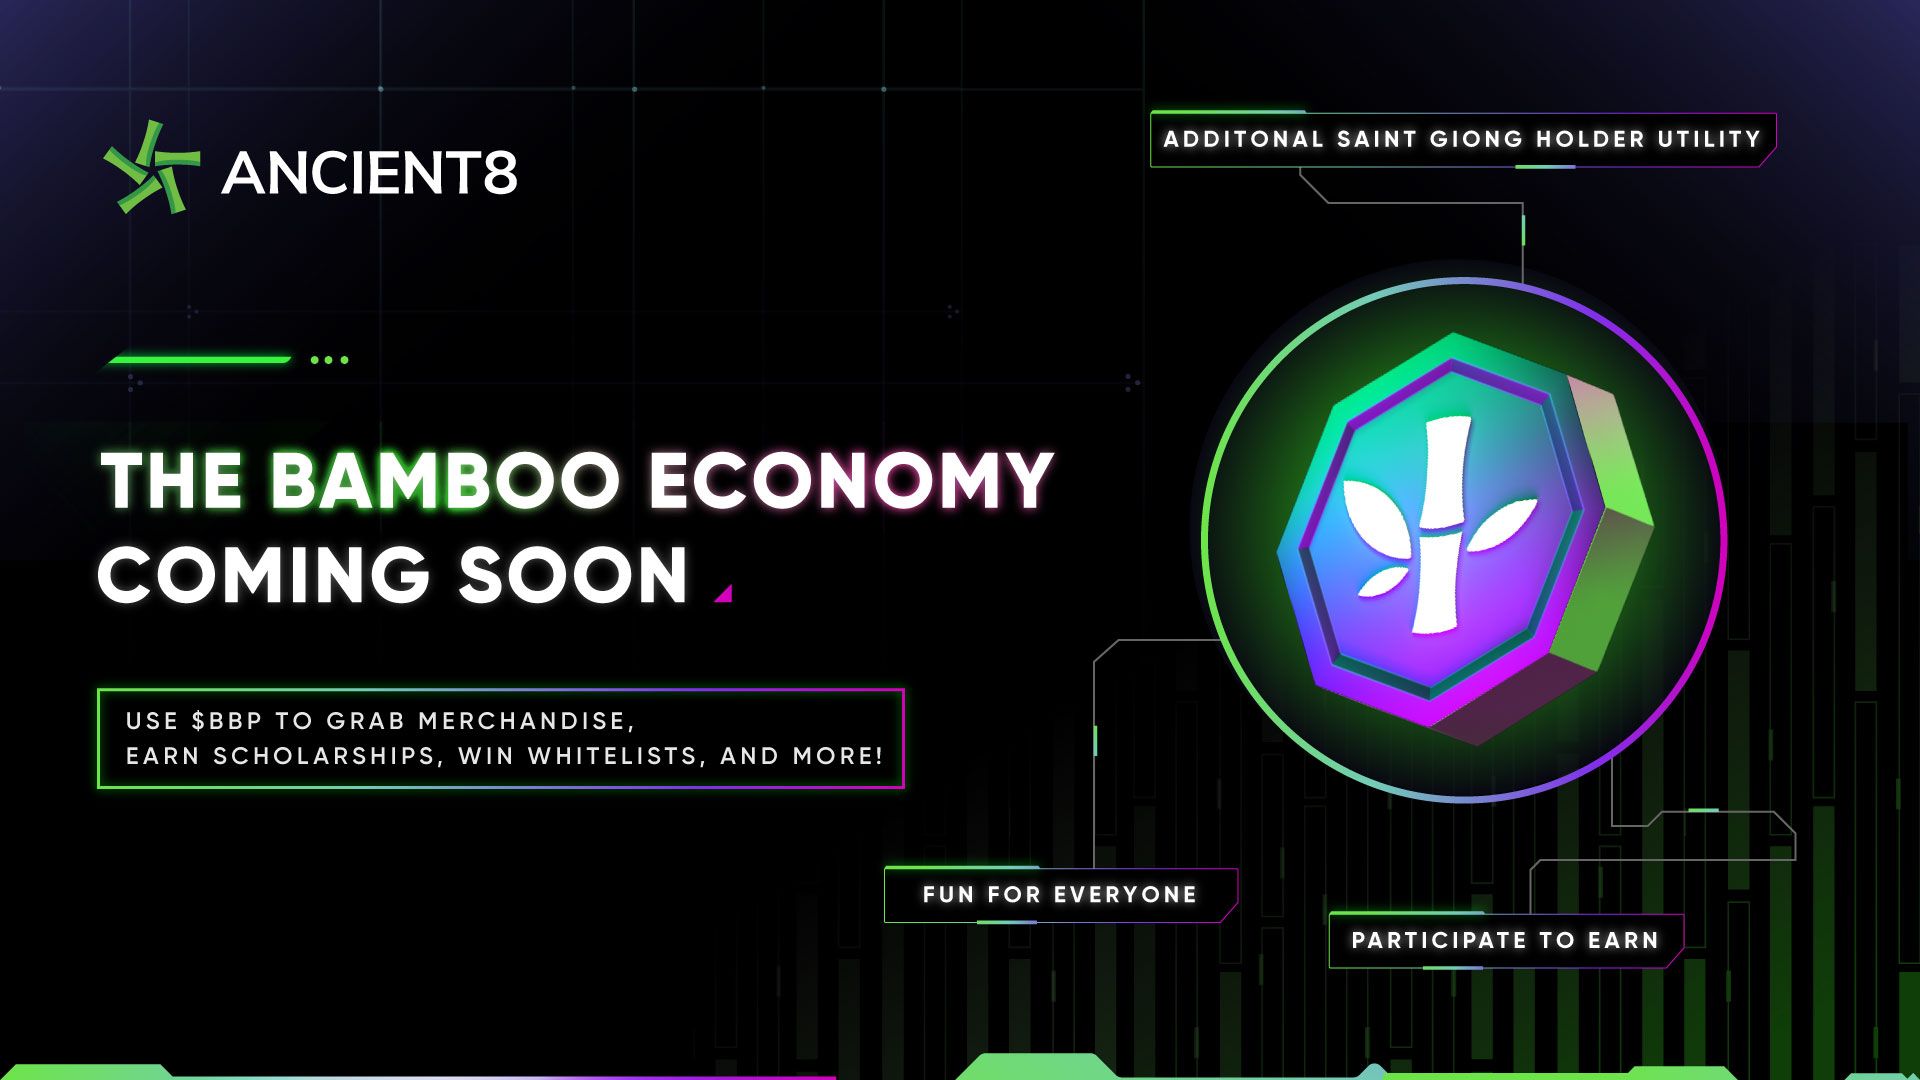 Introducing Ancient8 Discord Economy - Bamboo Points (BBP) Community Rewards